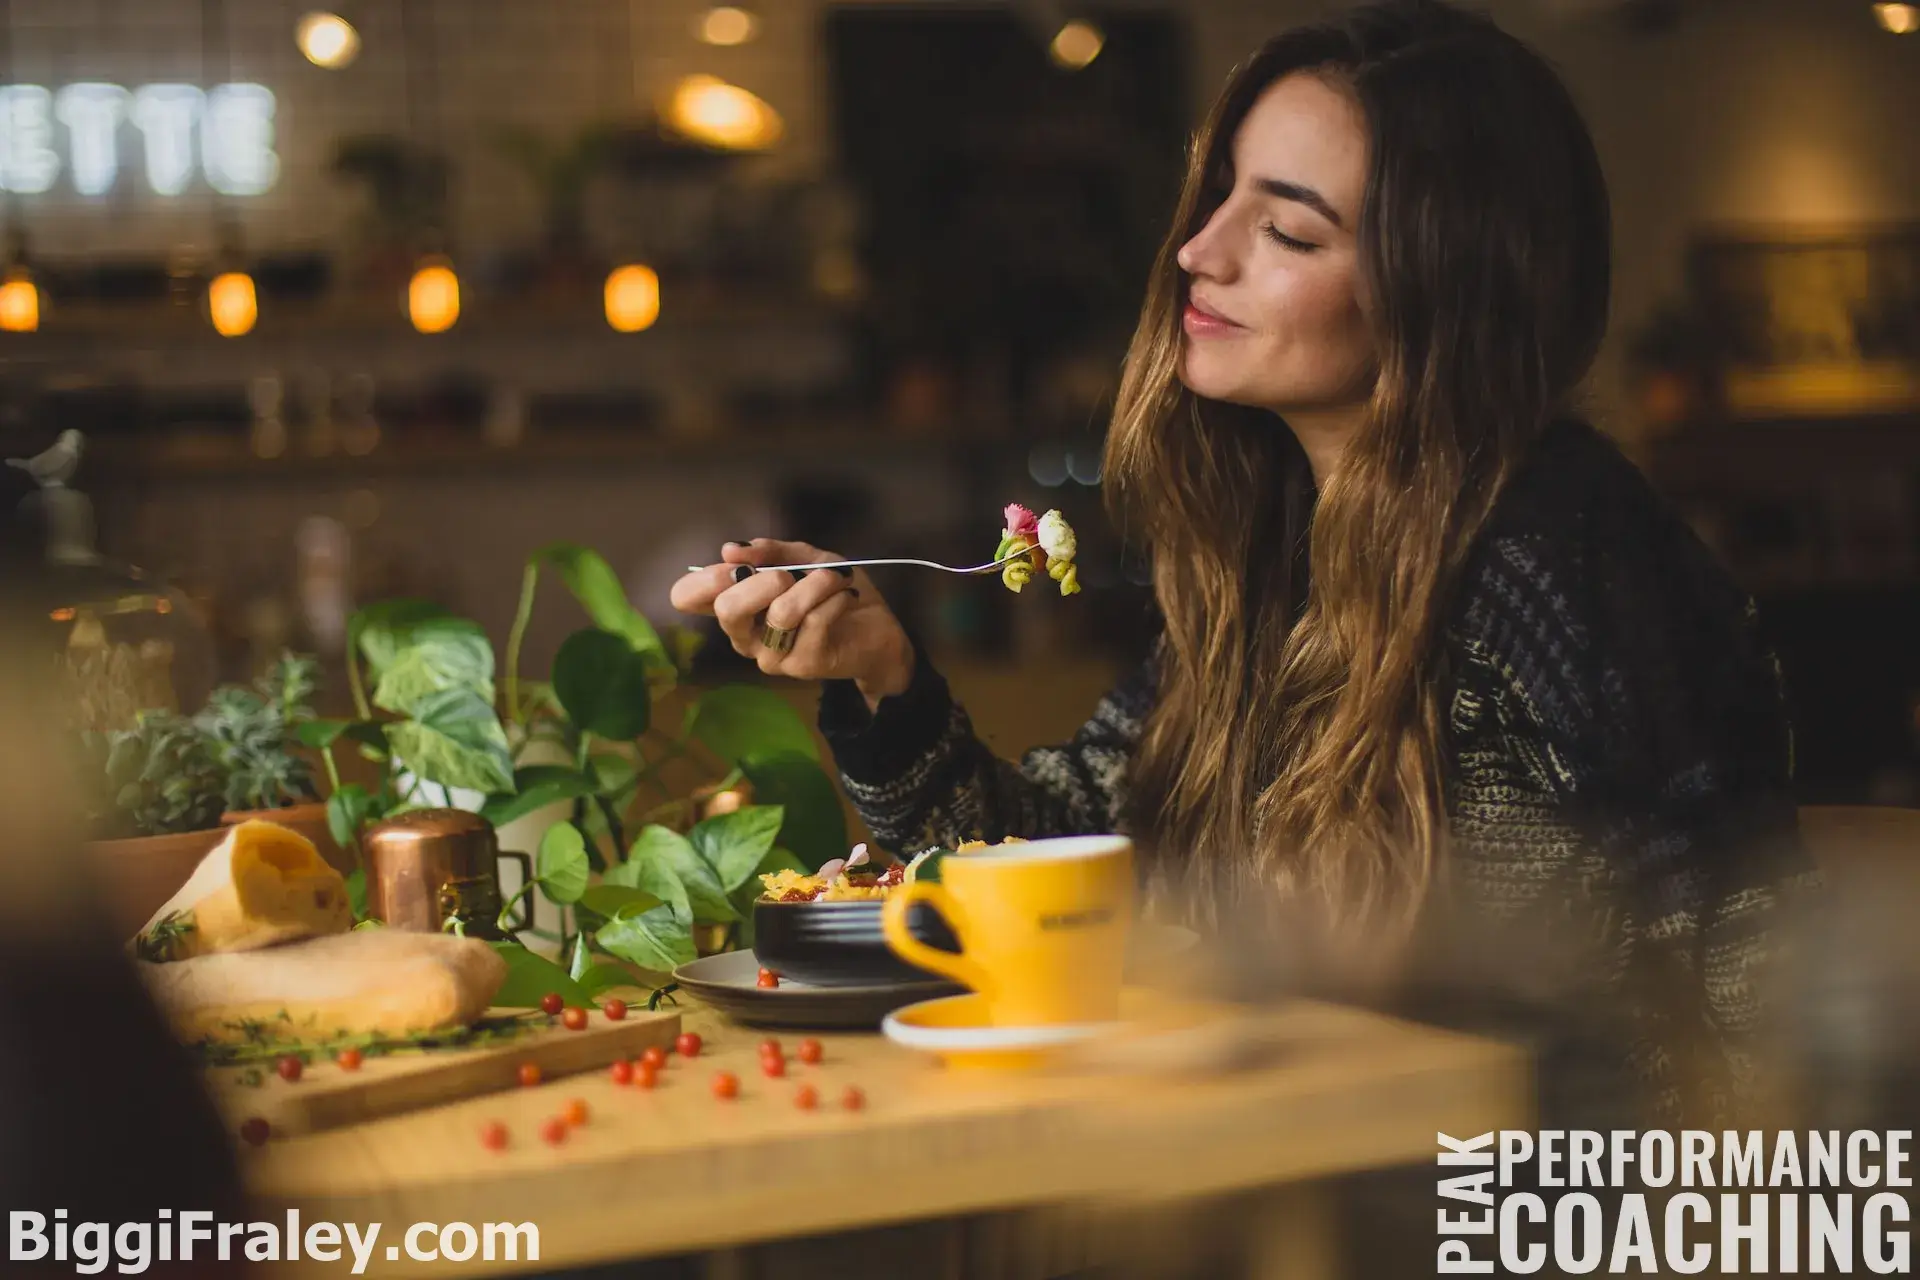 woman sitting at the table, fork in hand, clearly savoring her food